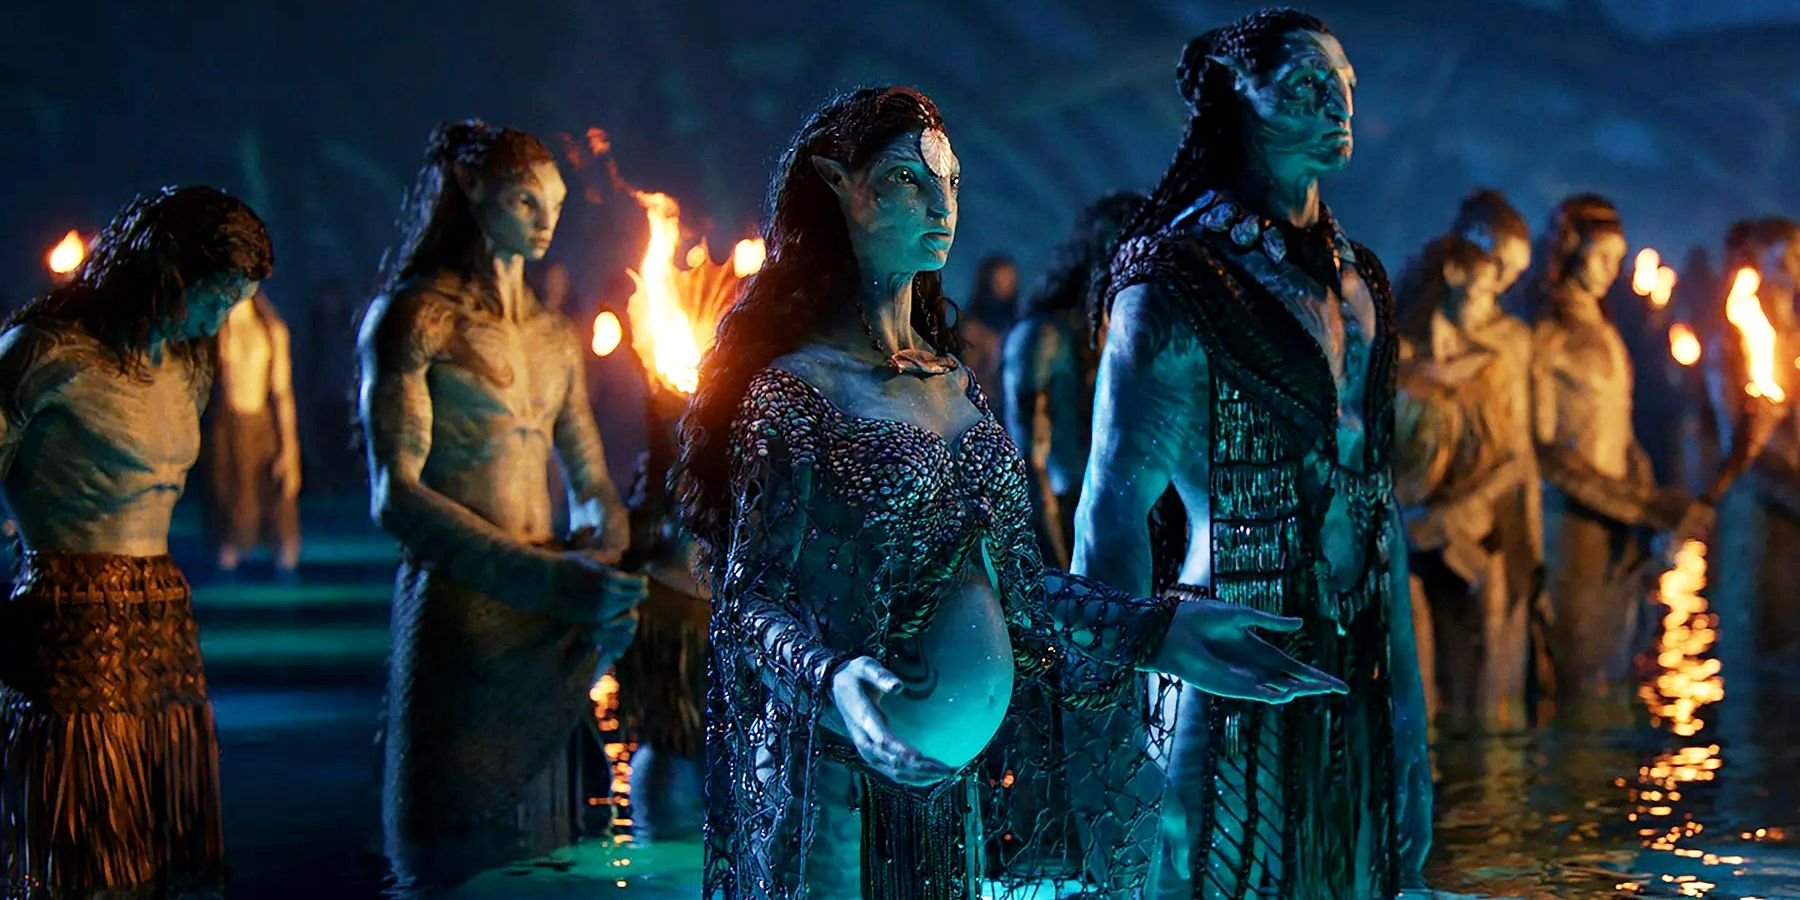 Kate Winslet as Ronal standing in water with hands raised in Avatar The Way of Water